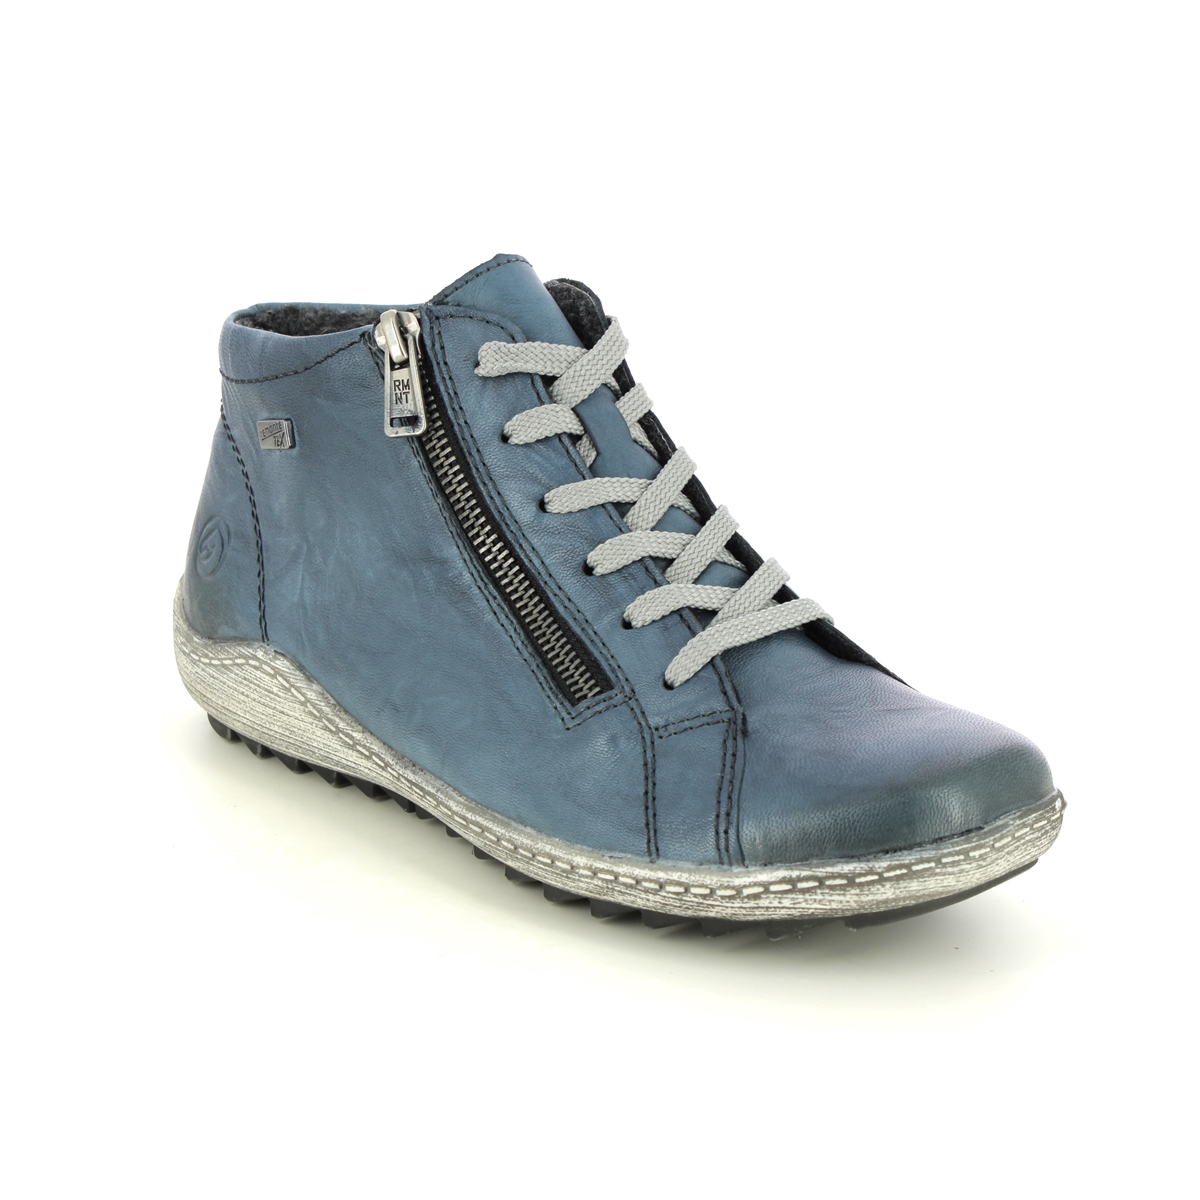 Remonte Zigzip Tex Blue Leather Womens Hi Tops R1470-16 In Size 41 In Plain Blue Leather